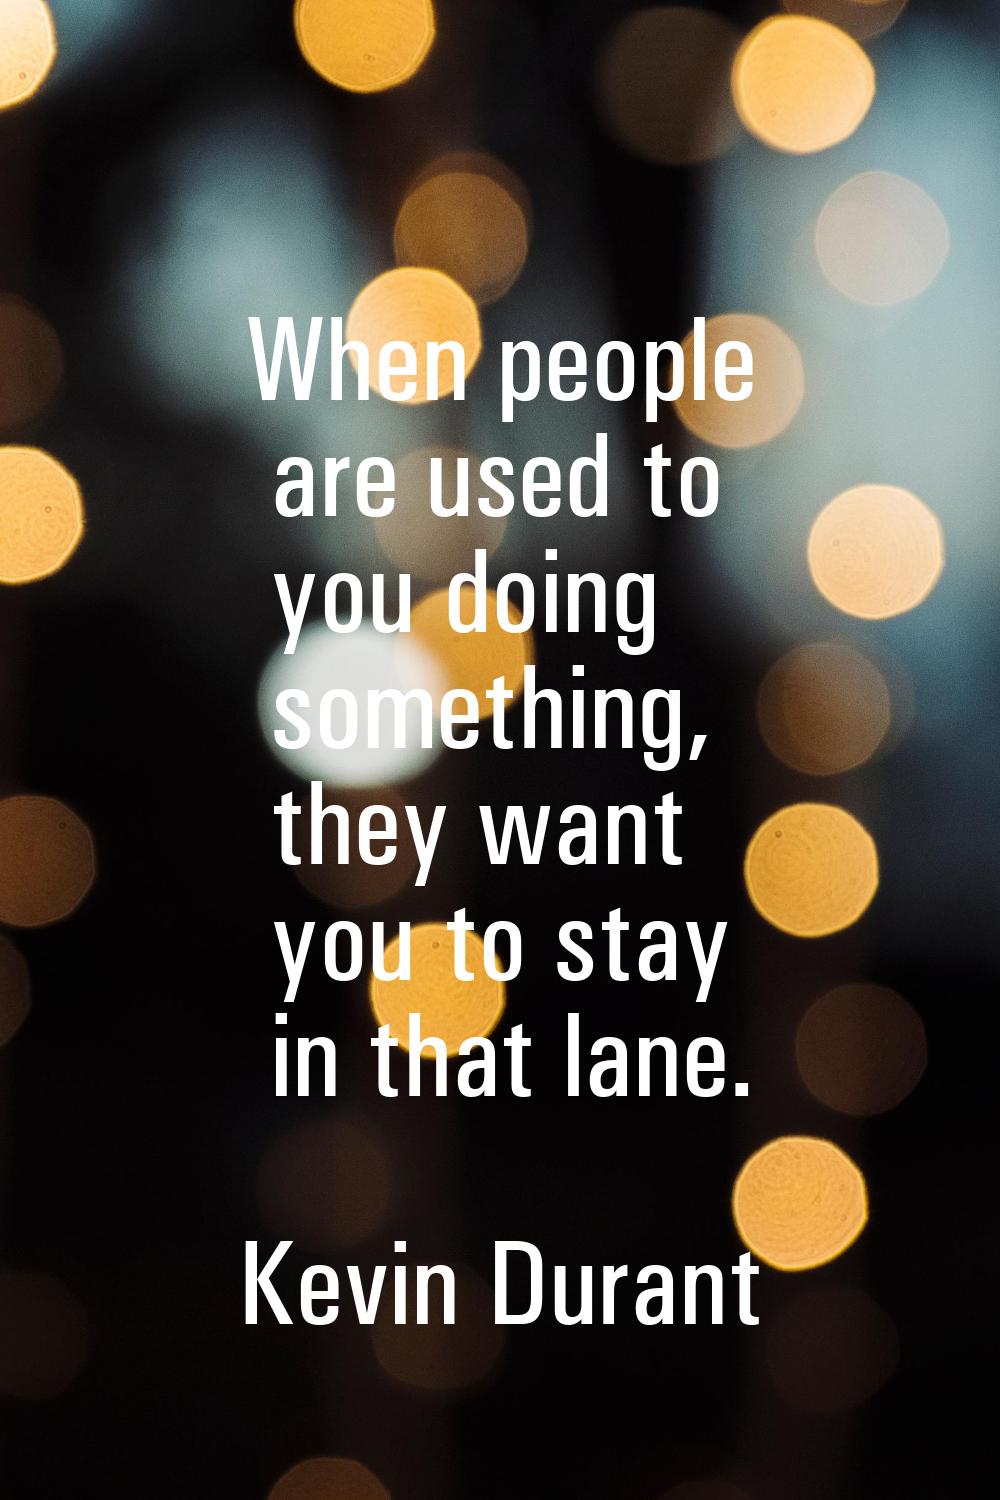 When people are used to you doing something, they want you to stay in that lane.